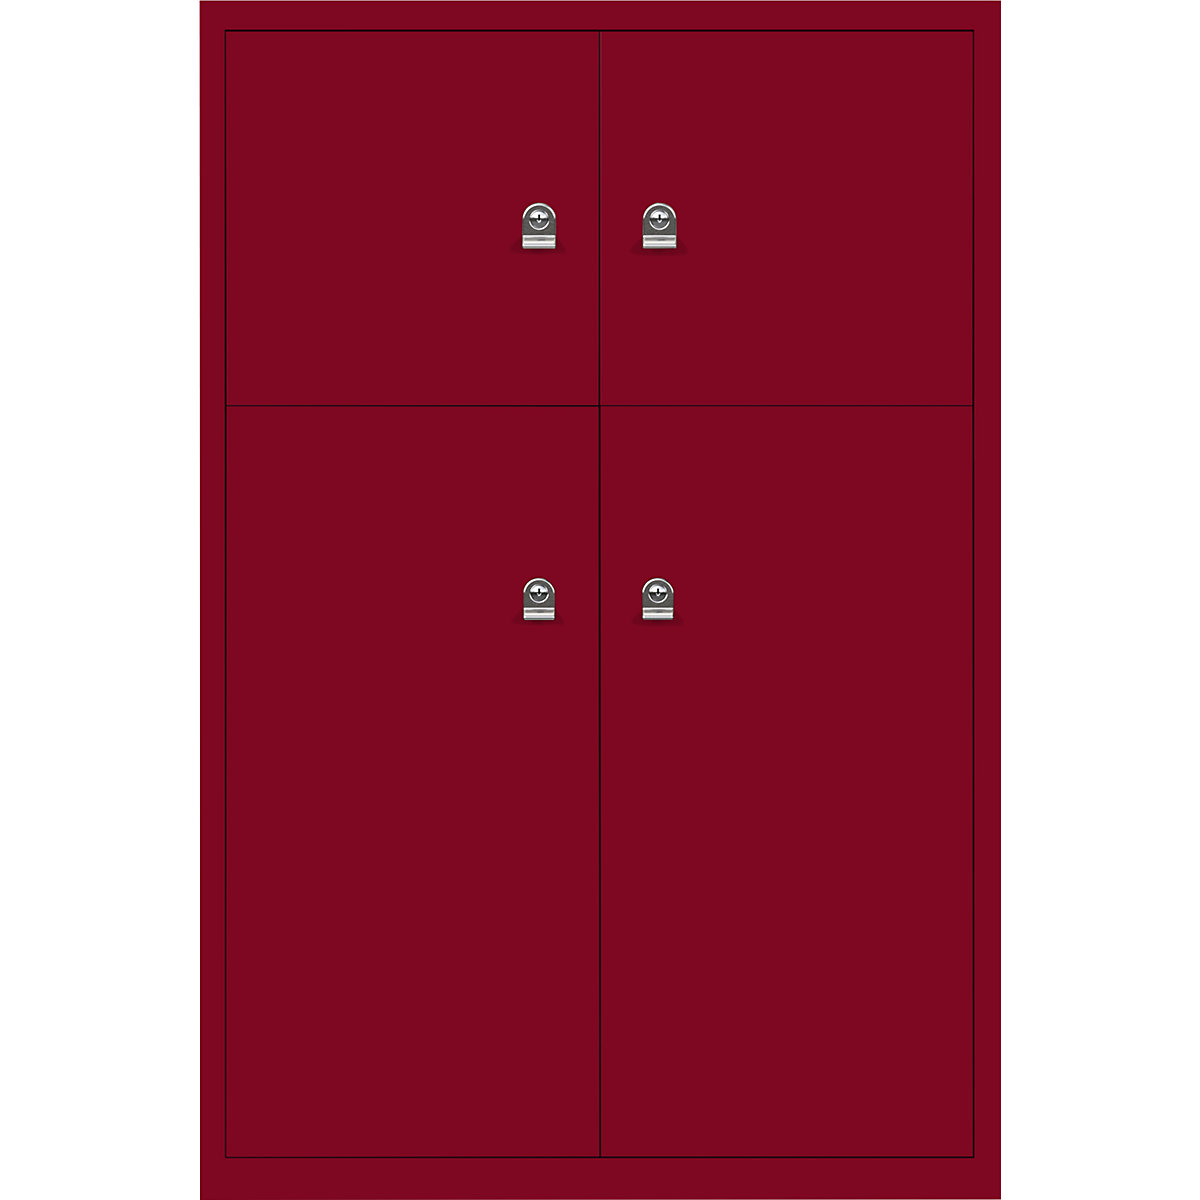 BISLEY – LateralFile™ lodge, with 4 lockable compartments, height 2 x 375 mm, 2 x 755 mm, cardinal red